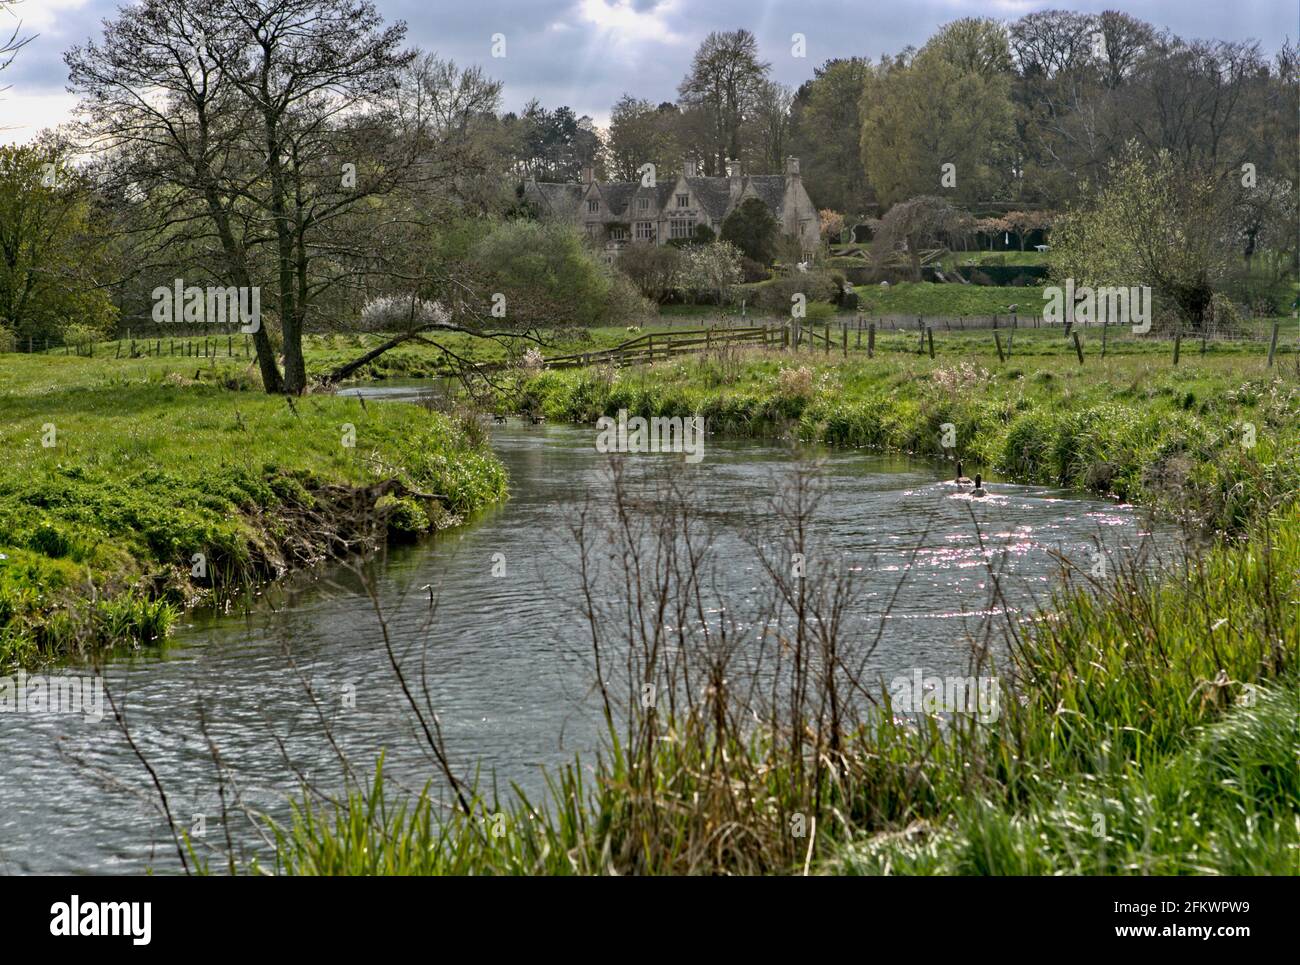 Asthall Manor in Asthall, Oxfordshire, is sited on the River Windrush. Stock Photo